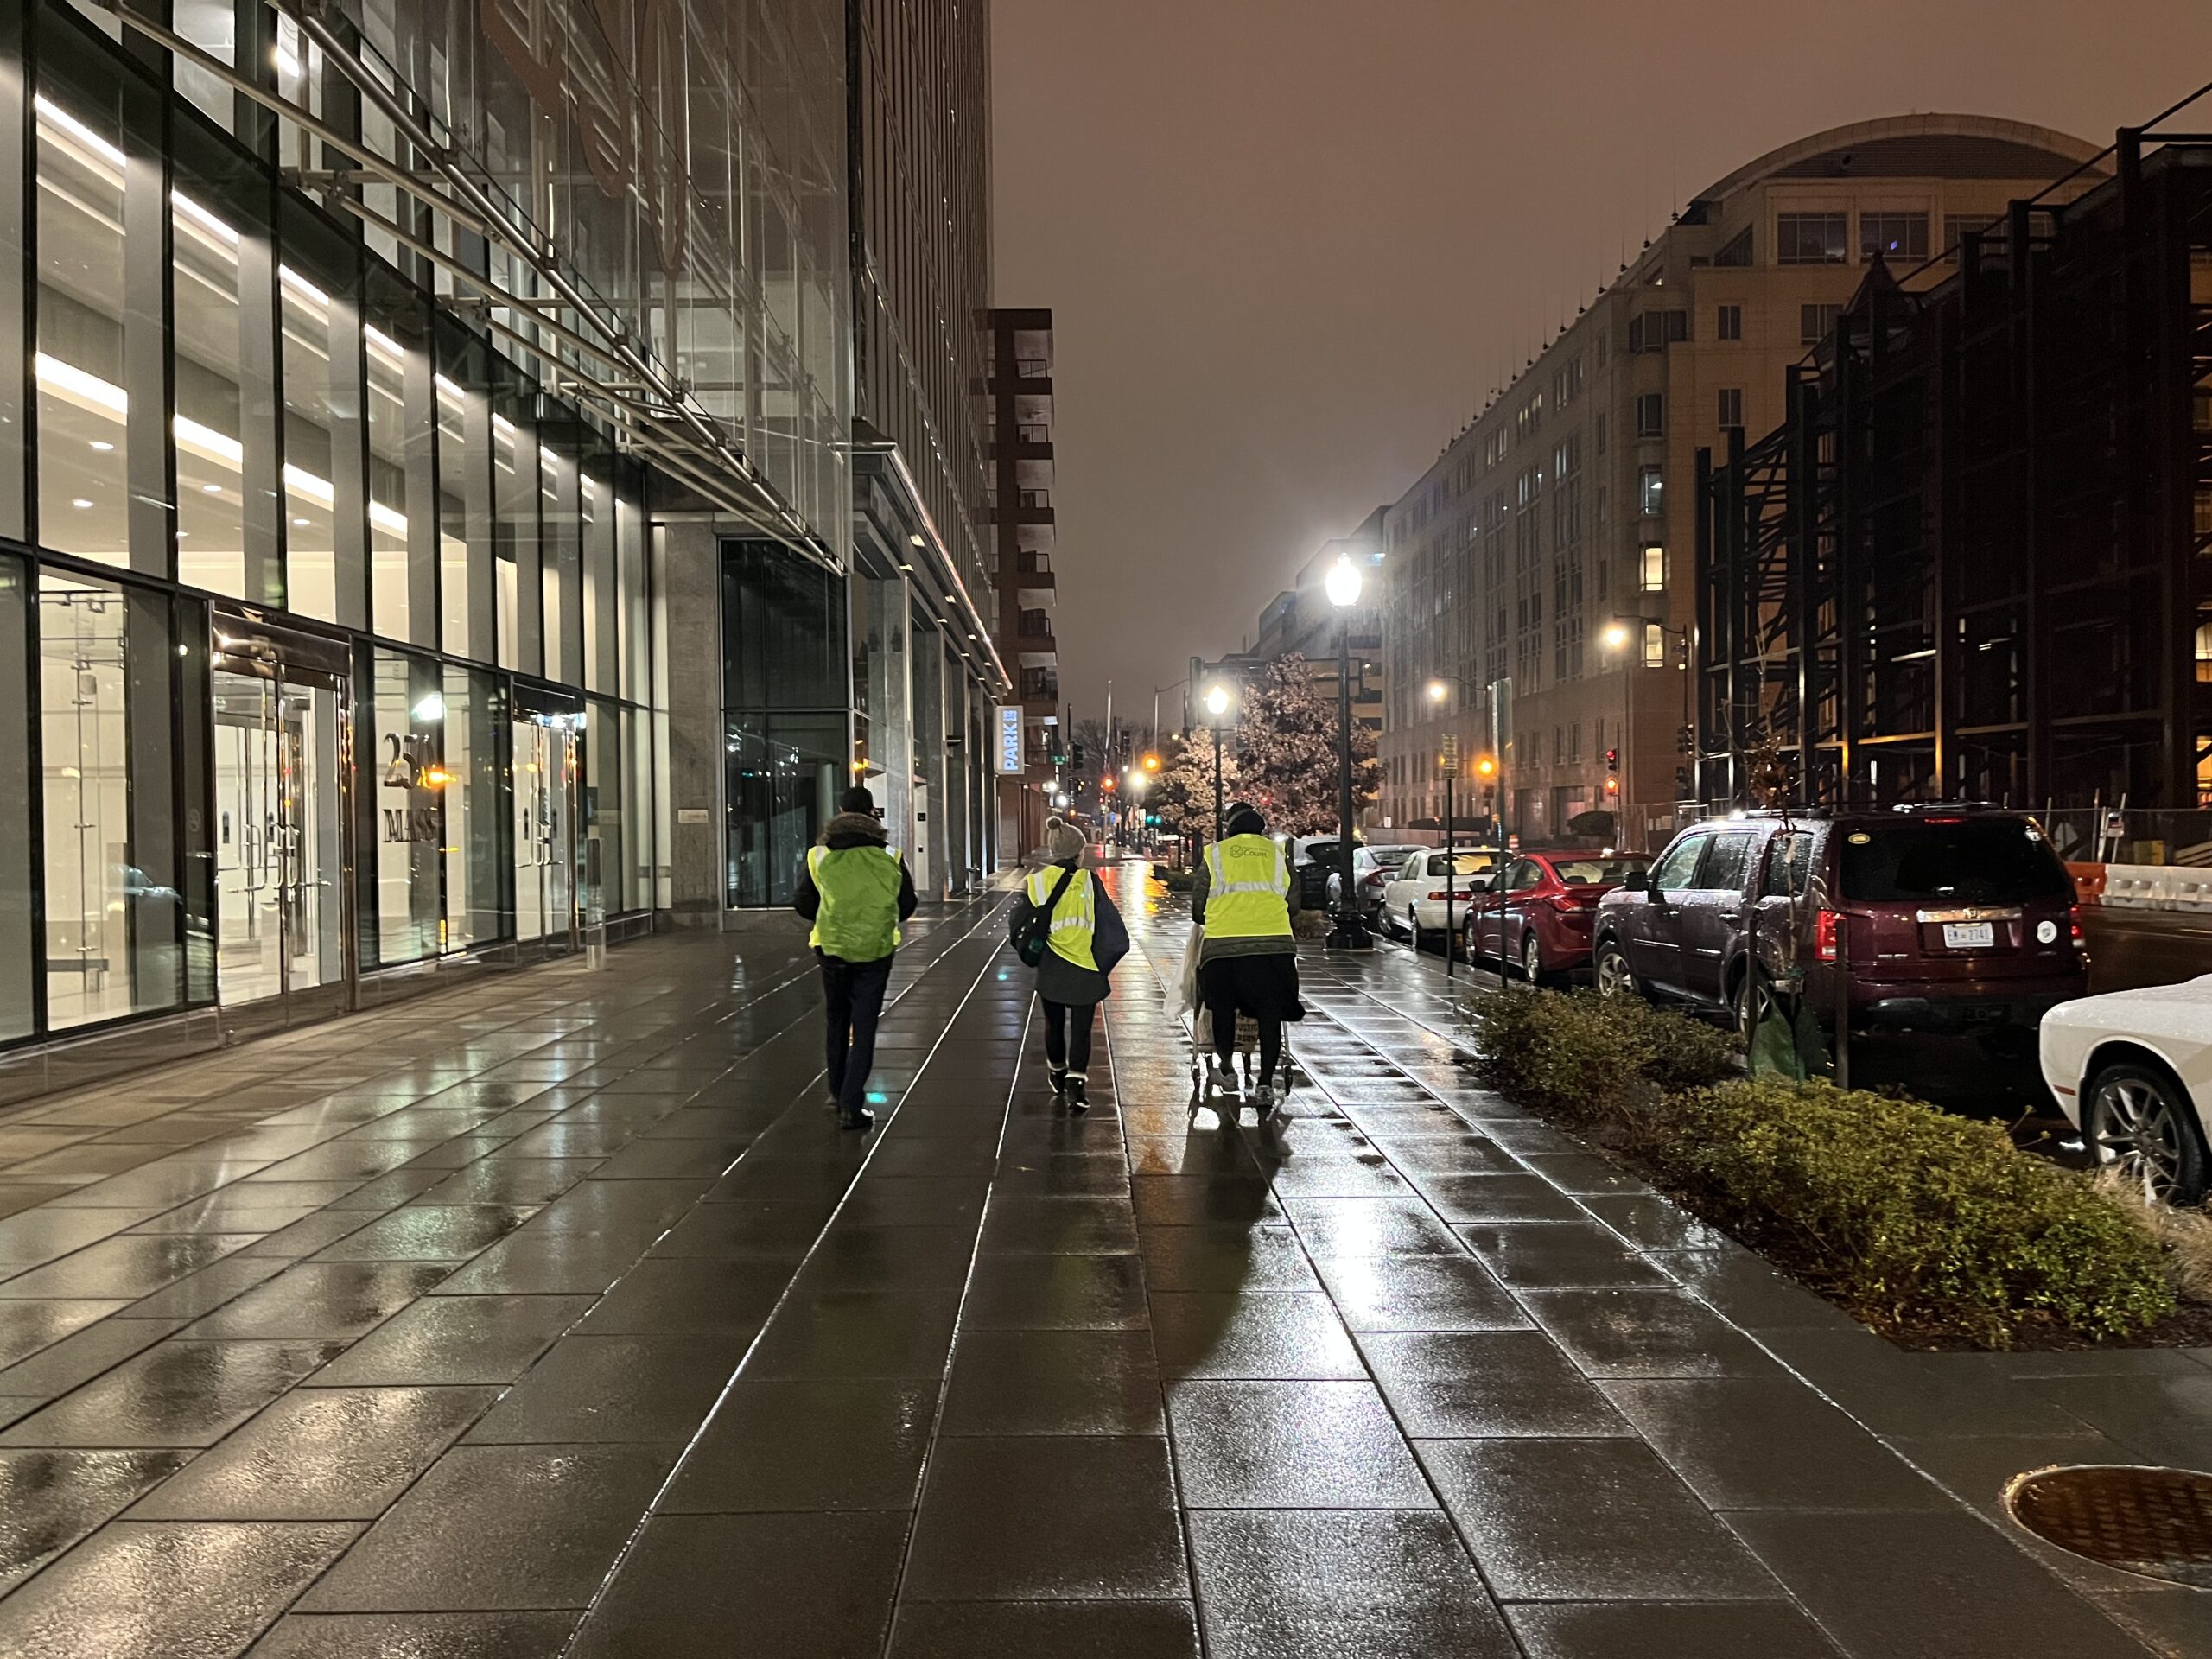 Three people in yellow vests walk down a rainy street.